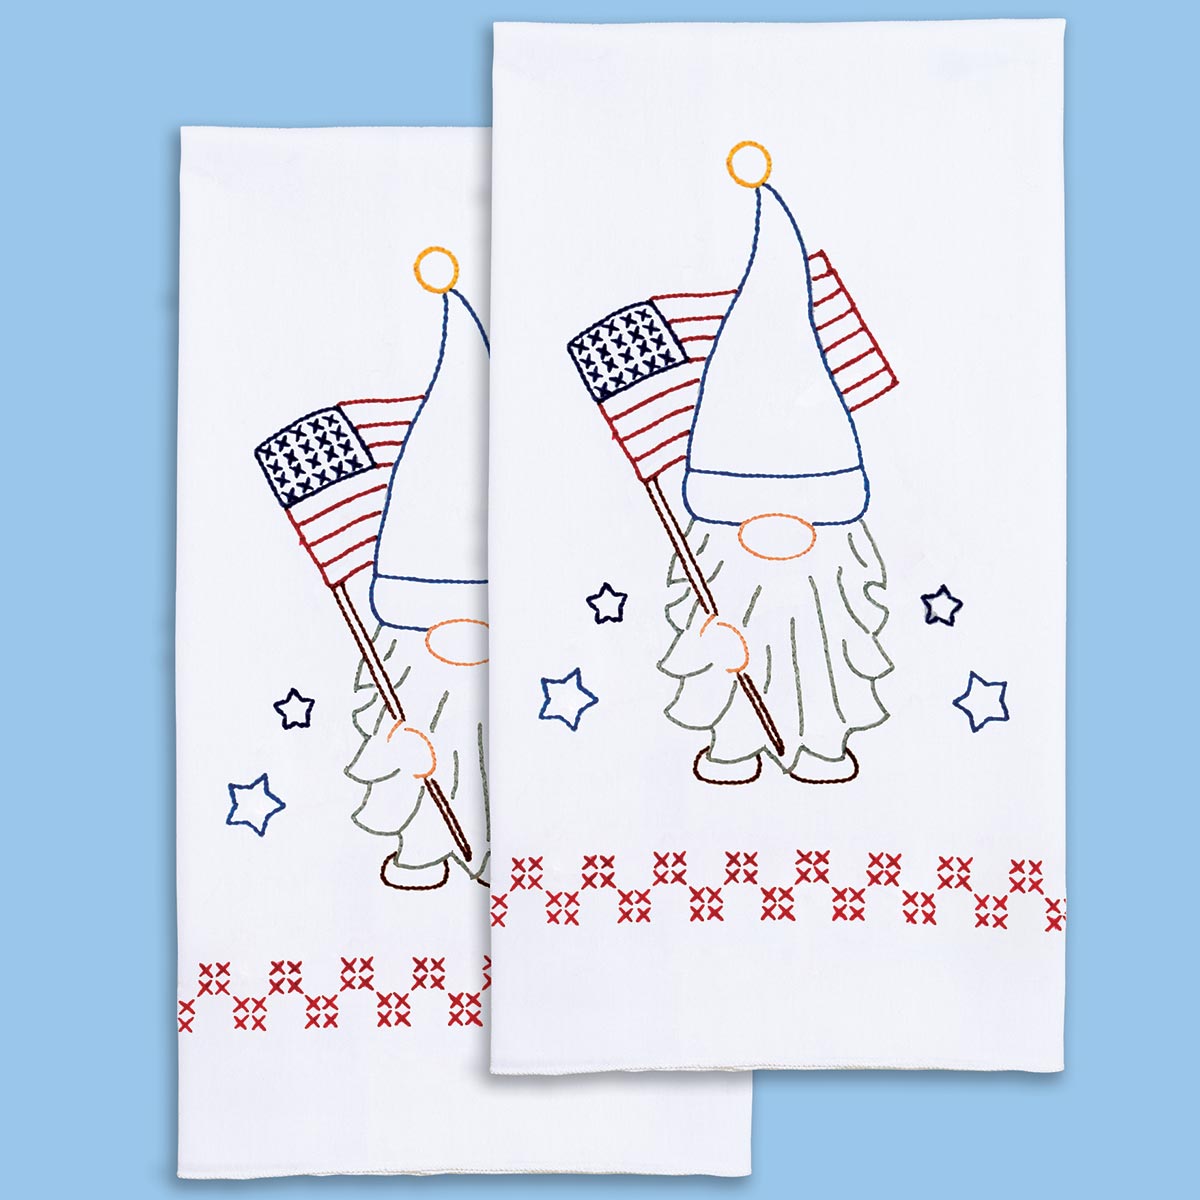 https://www.jdneedleart.com/wp-content/uploads/JDNA-320-614-INDEPENDENCE-DAY-GNOME-HAND-TOWEL.jpg